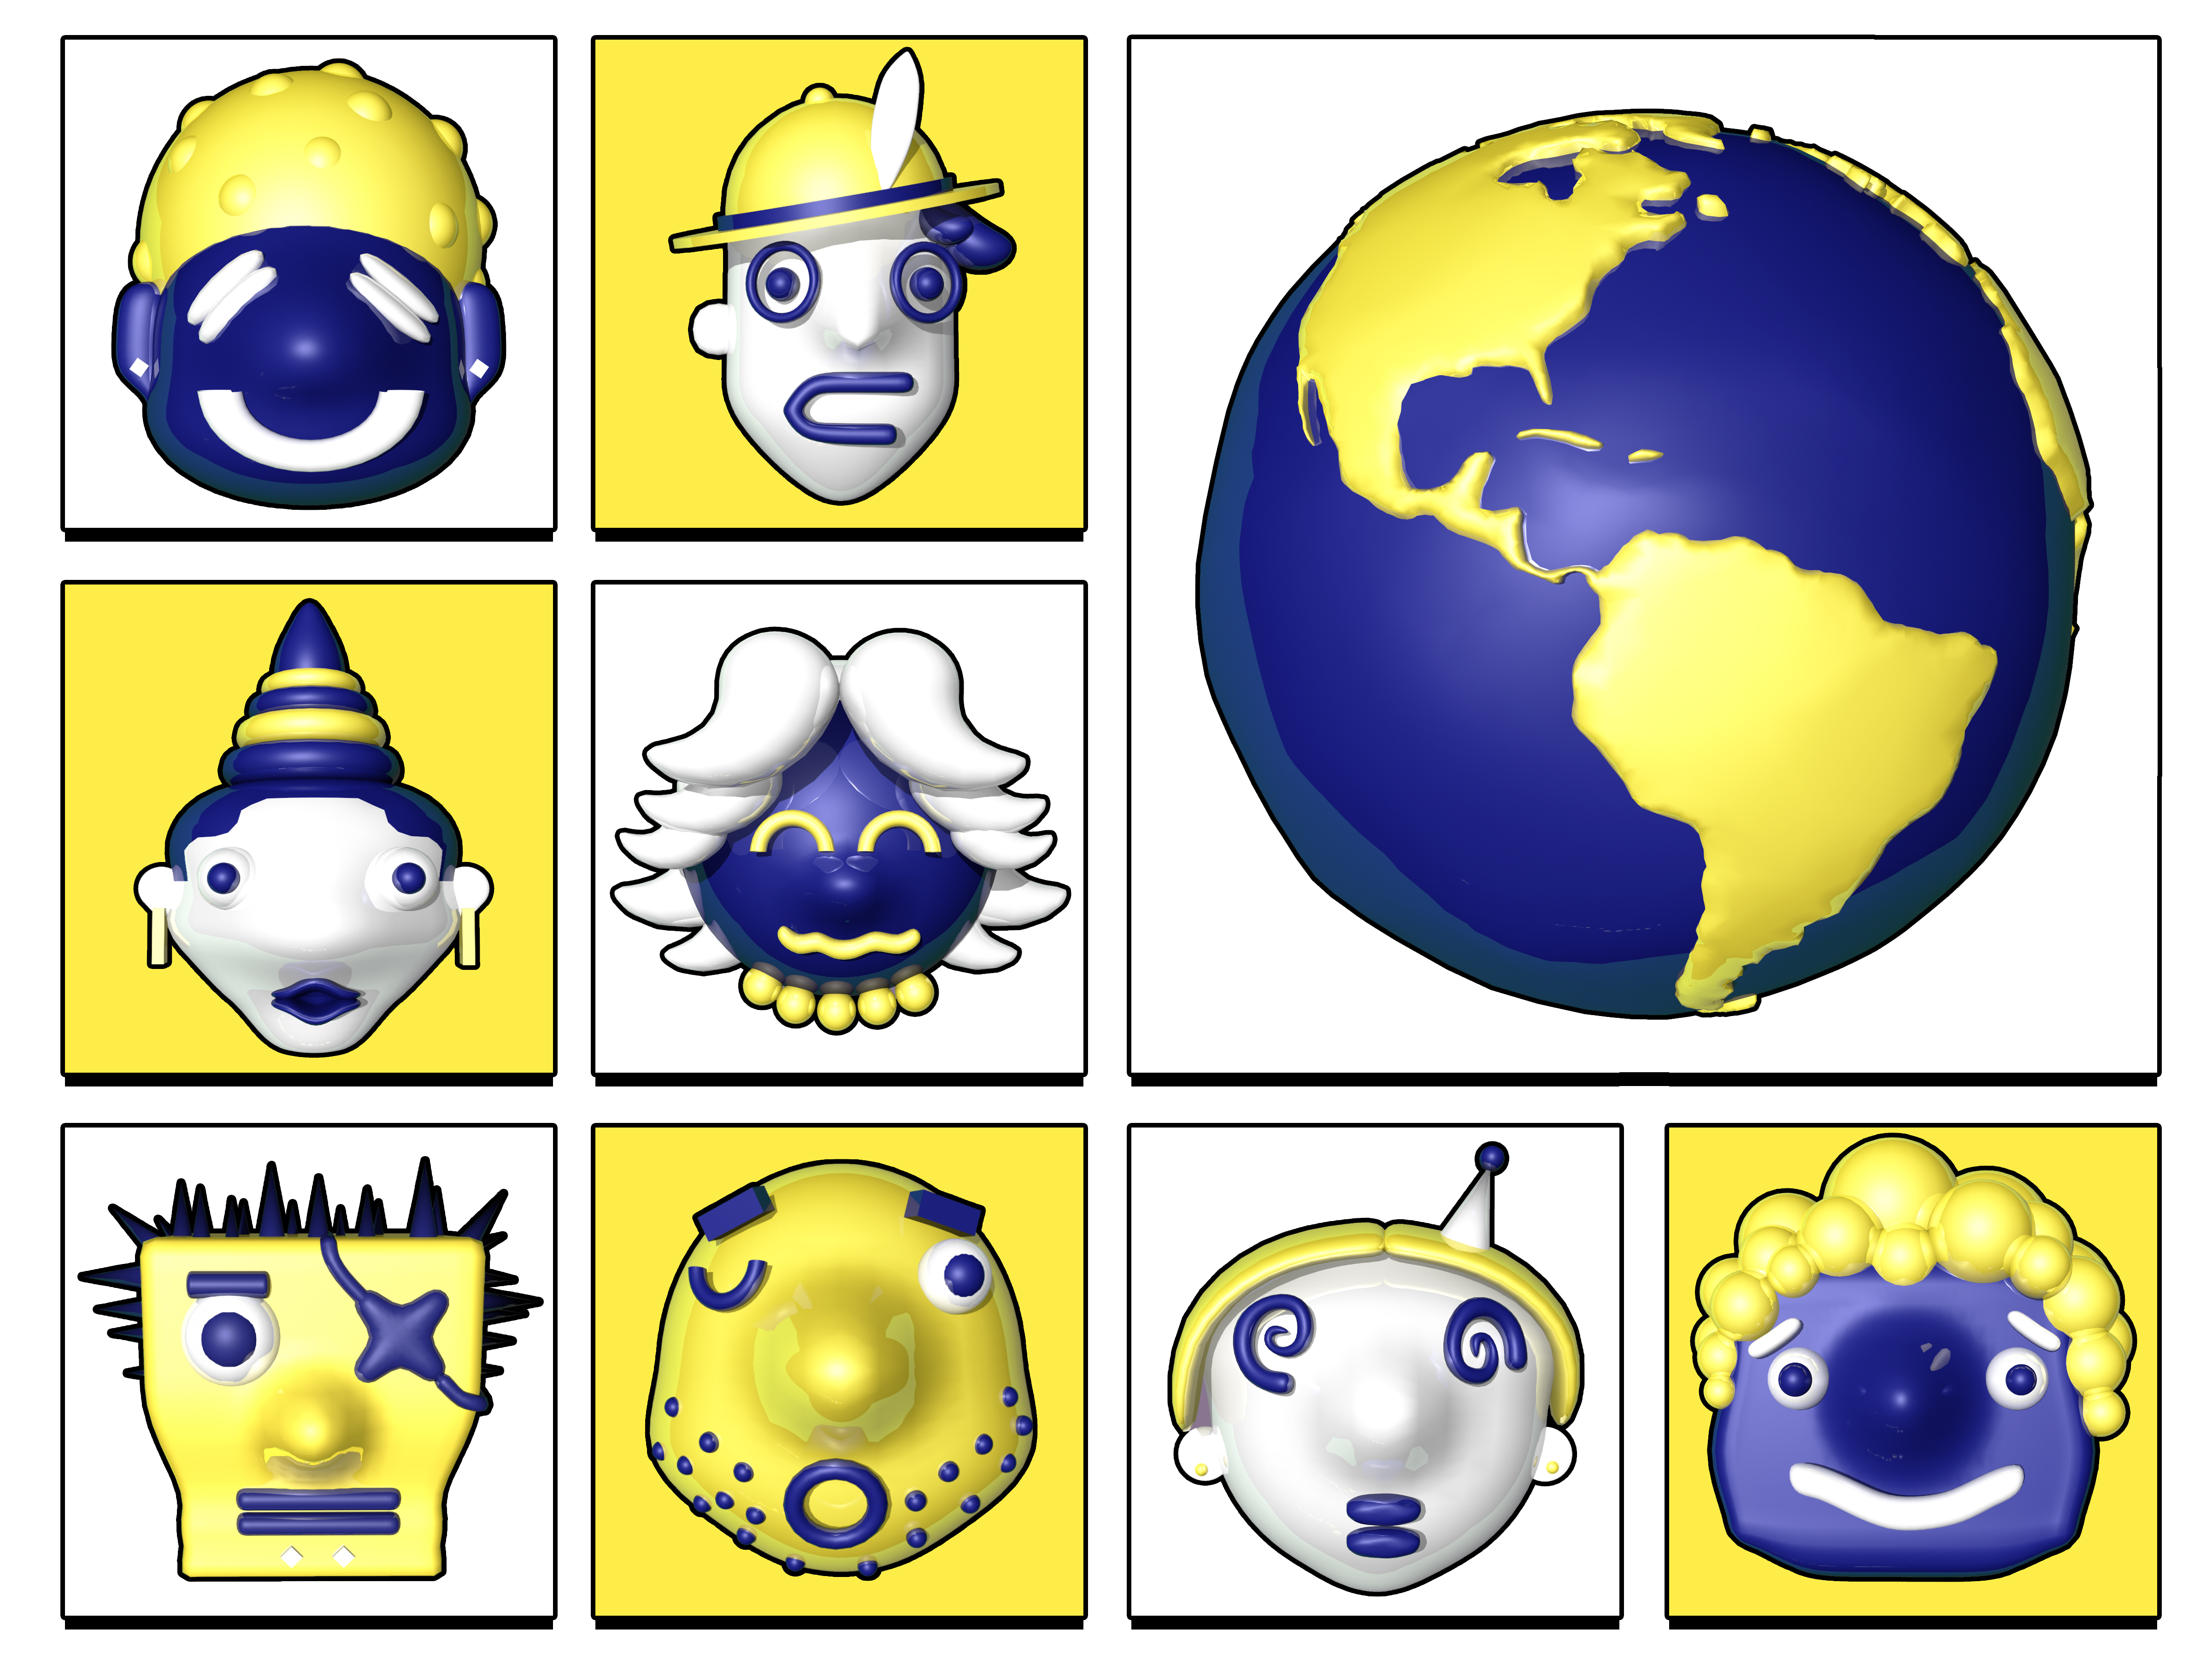 Grid of many stylized 3D character faces in various styles, shapes and sizes against a white background.